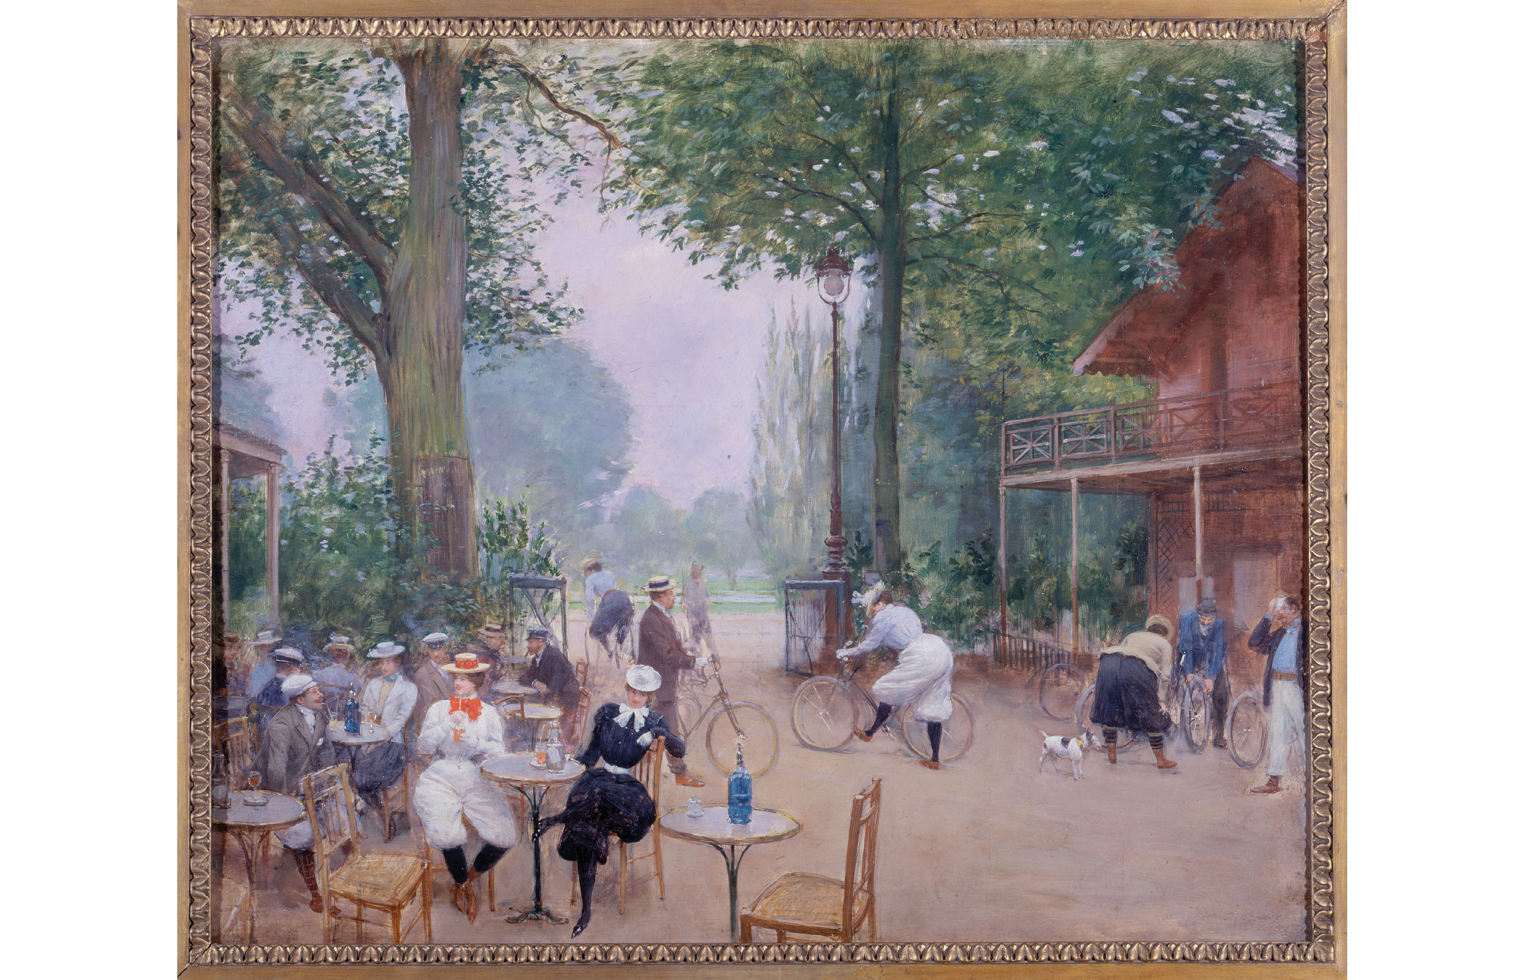 An oil painting ca. 1900: shows the outdoor part of a French chalet in the middle of a park; on the left side, men and women are seen enjoying drinks at a restaurant; in the middle and on the right, several people with bicycles; in the background large trees and park fences.